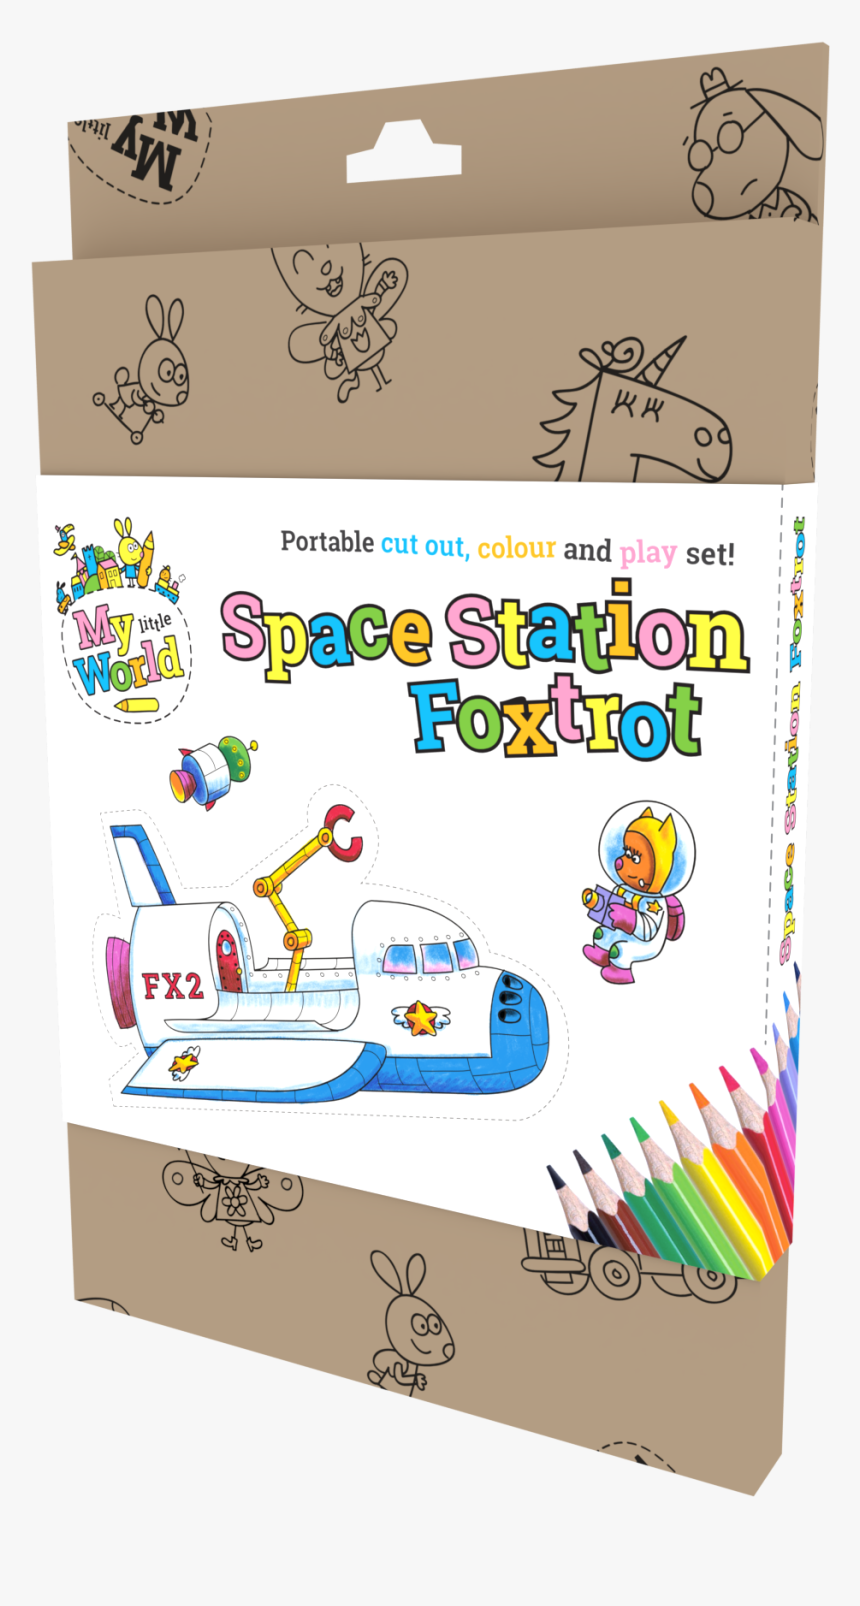 My Little World Space Station Foxtrot - Graphic Design, HD Png Download, Free Download